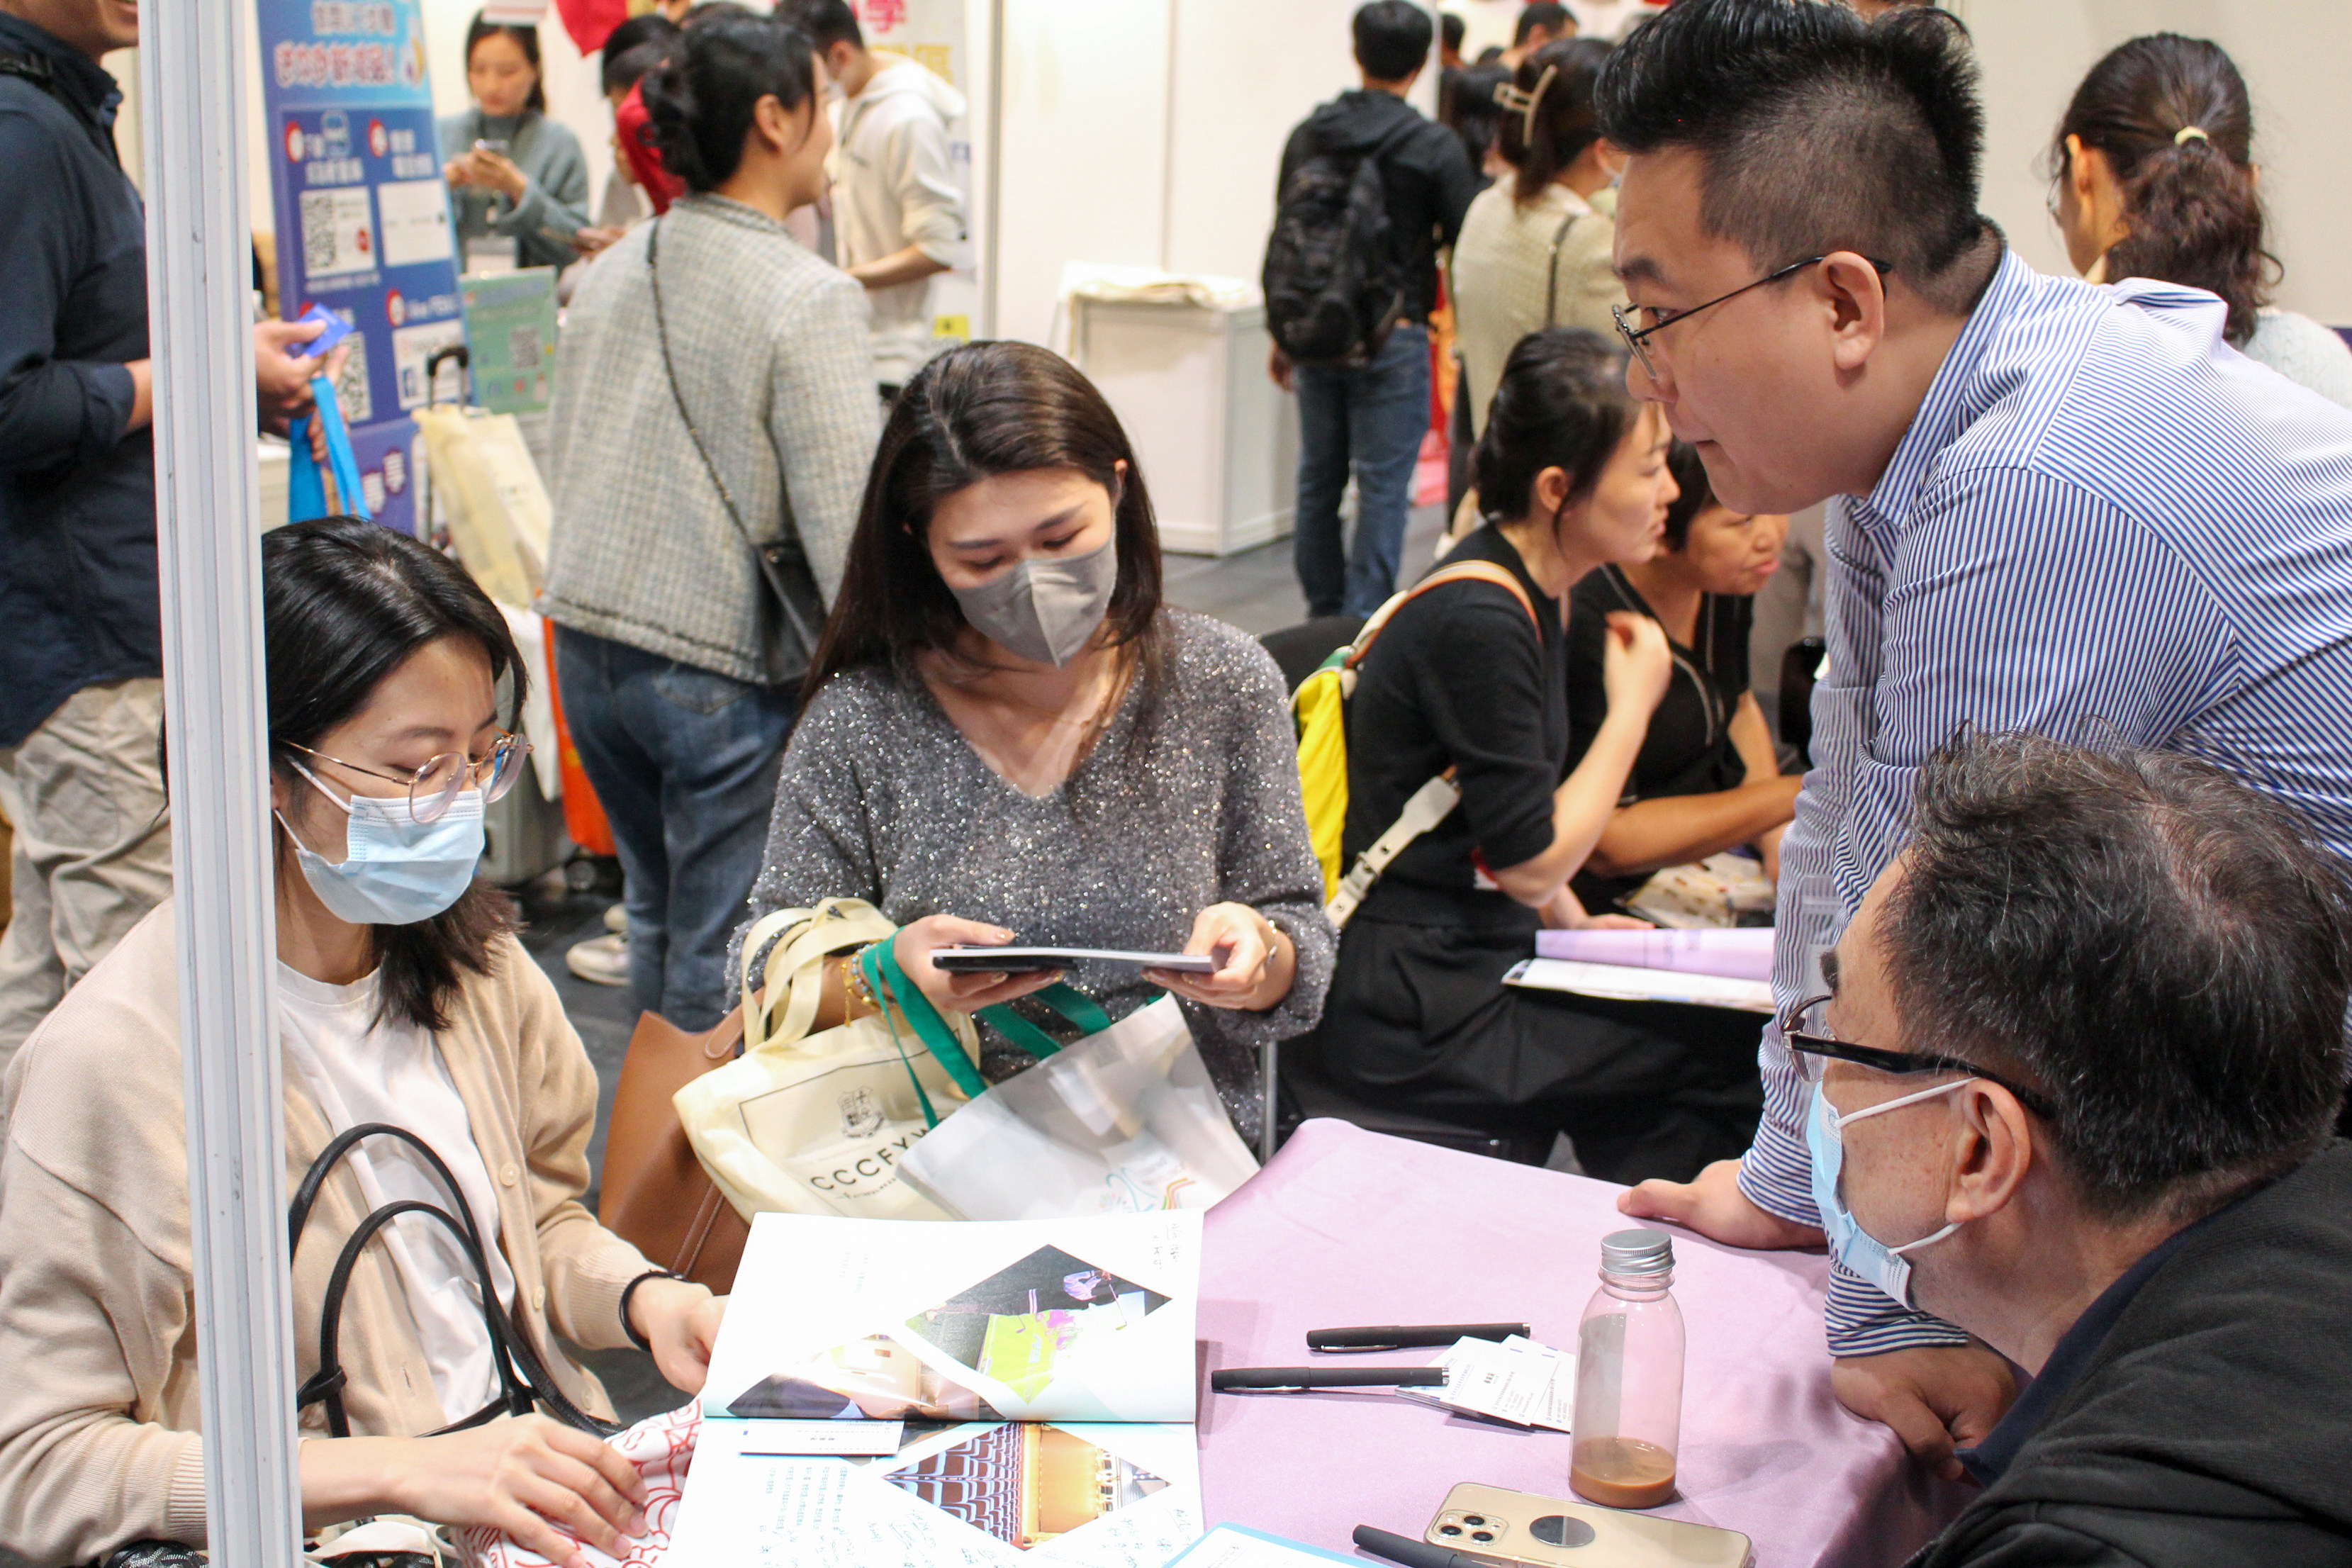 The expo attracted attendees from mainland cities such as Shenzhen, Wuhan and Beijing. Photo: Jack Deng 